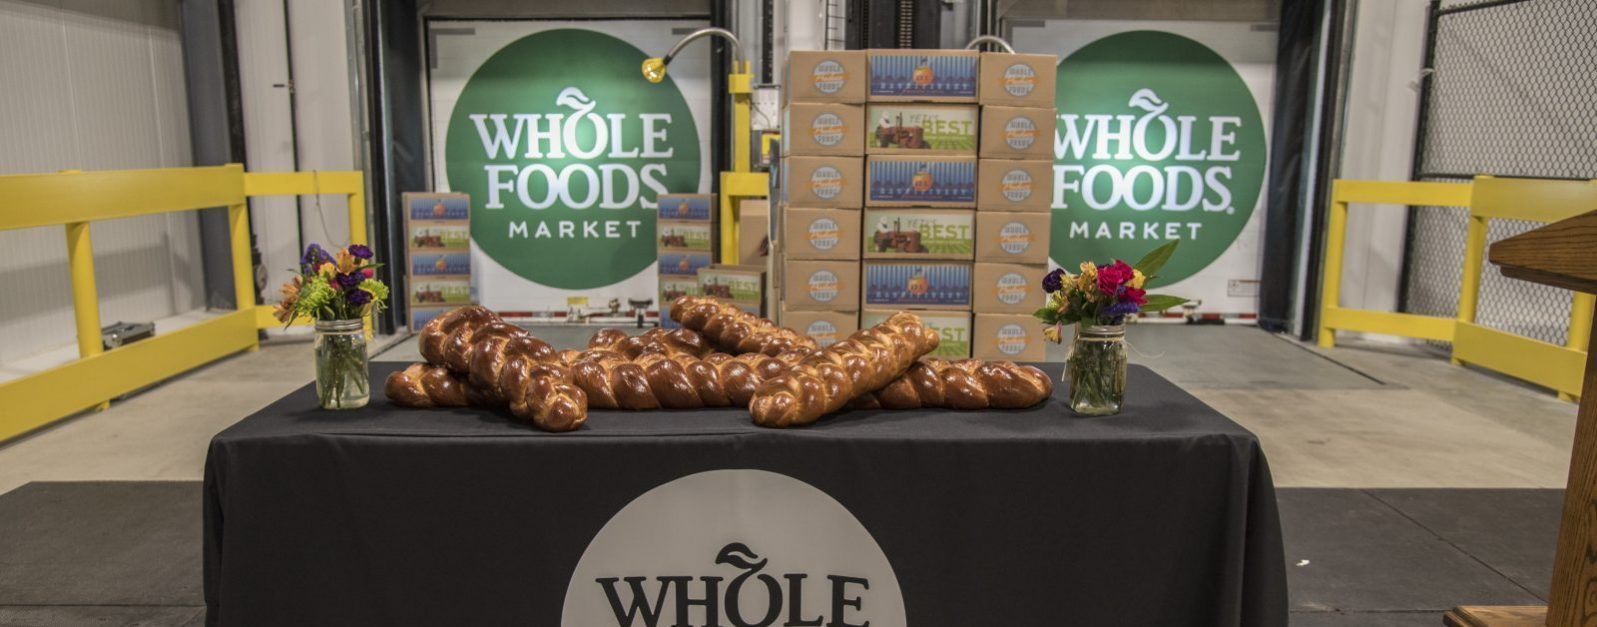 Grand Opening of the new Whole Foods Market Pullman Distribution Center